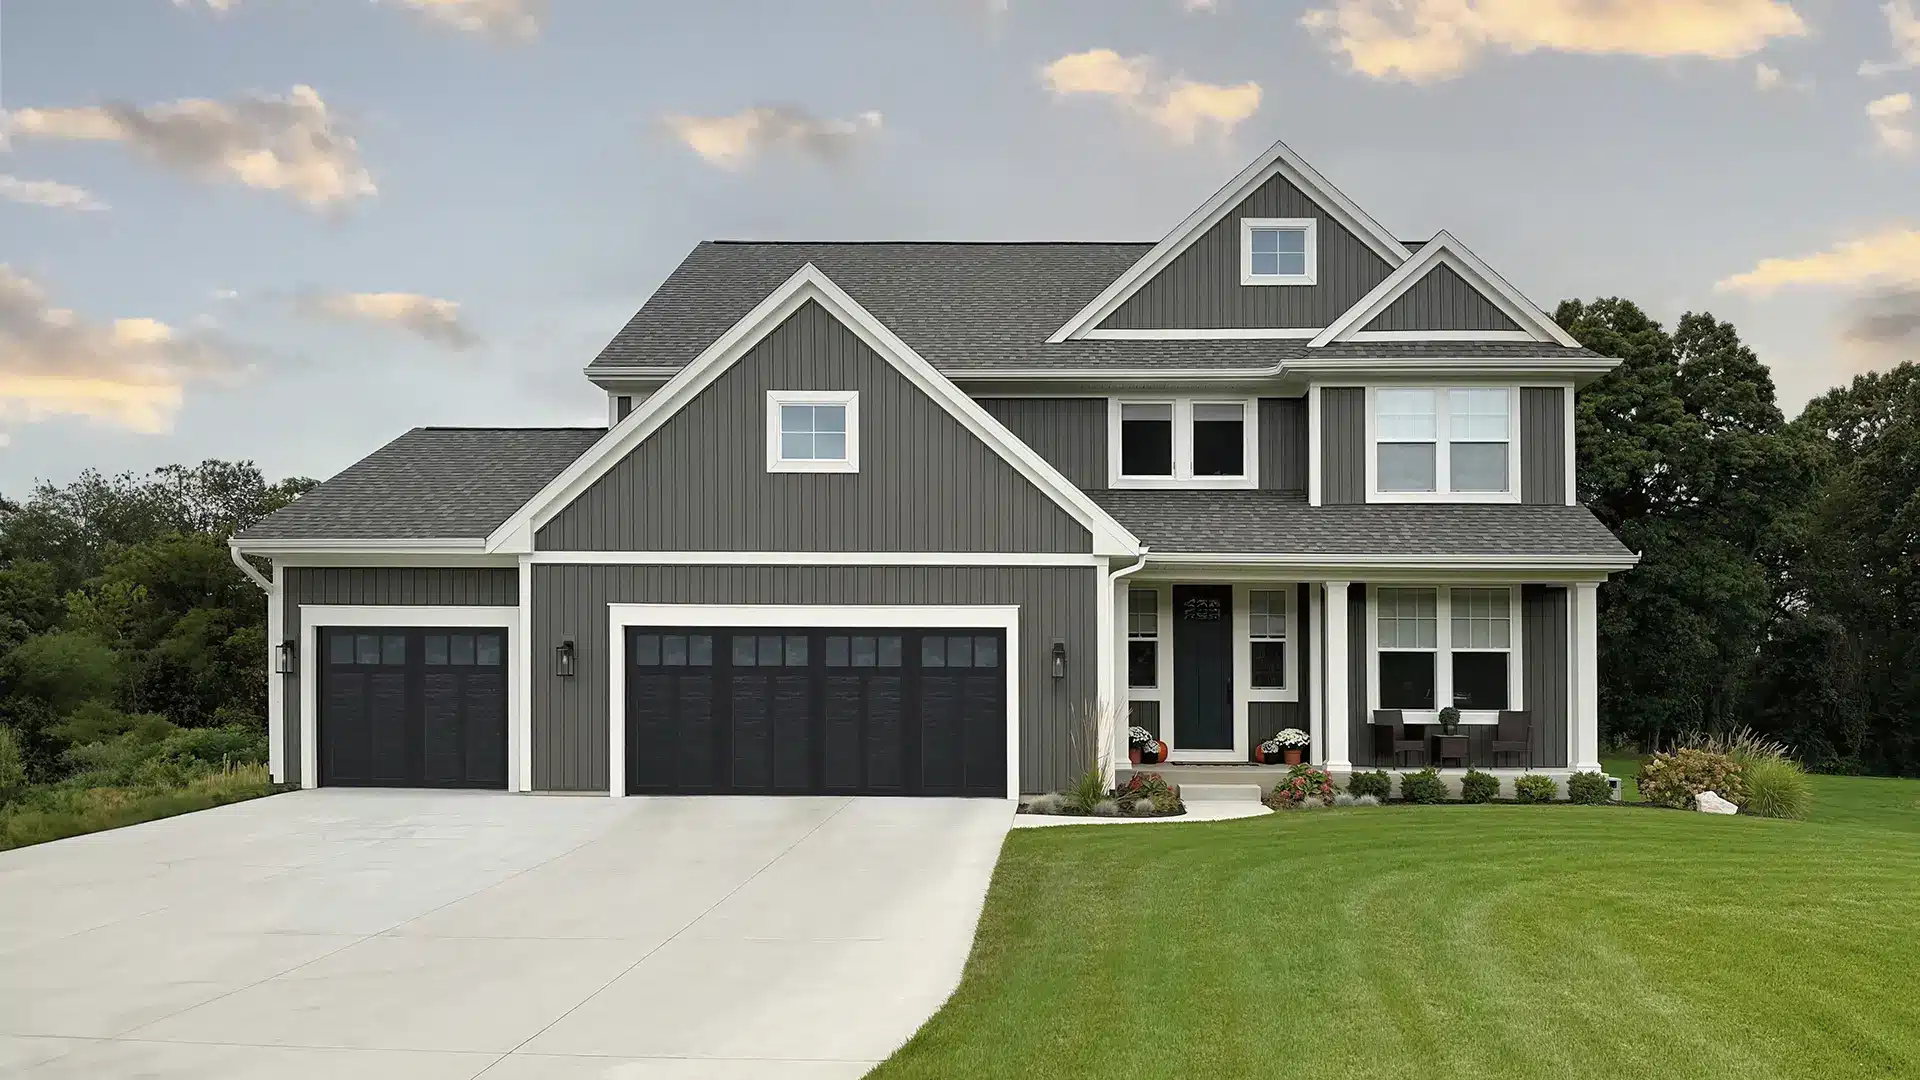 Black faux wood garage door on a grey house with white accents